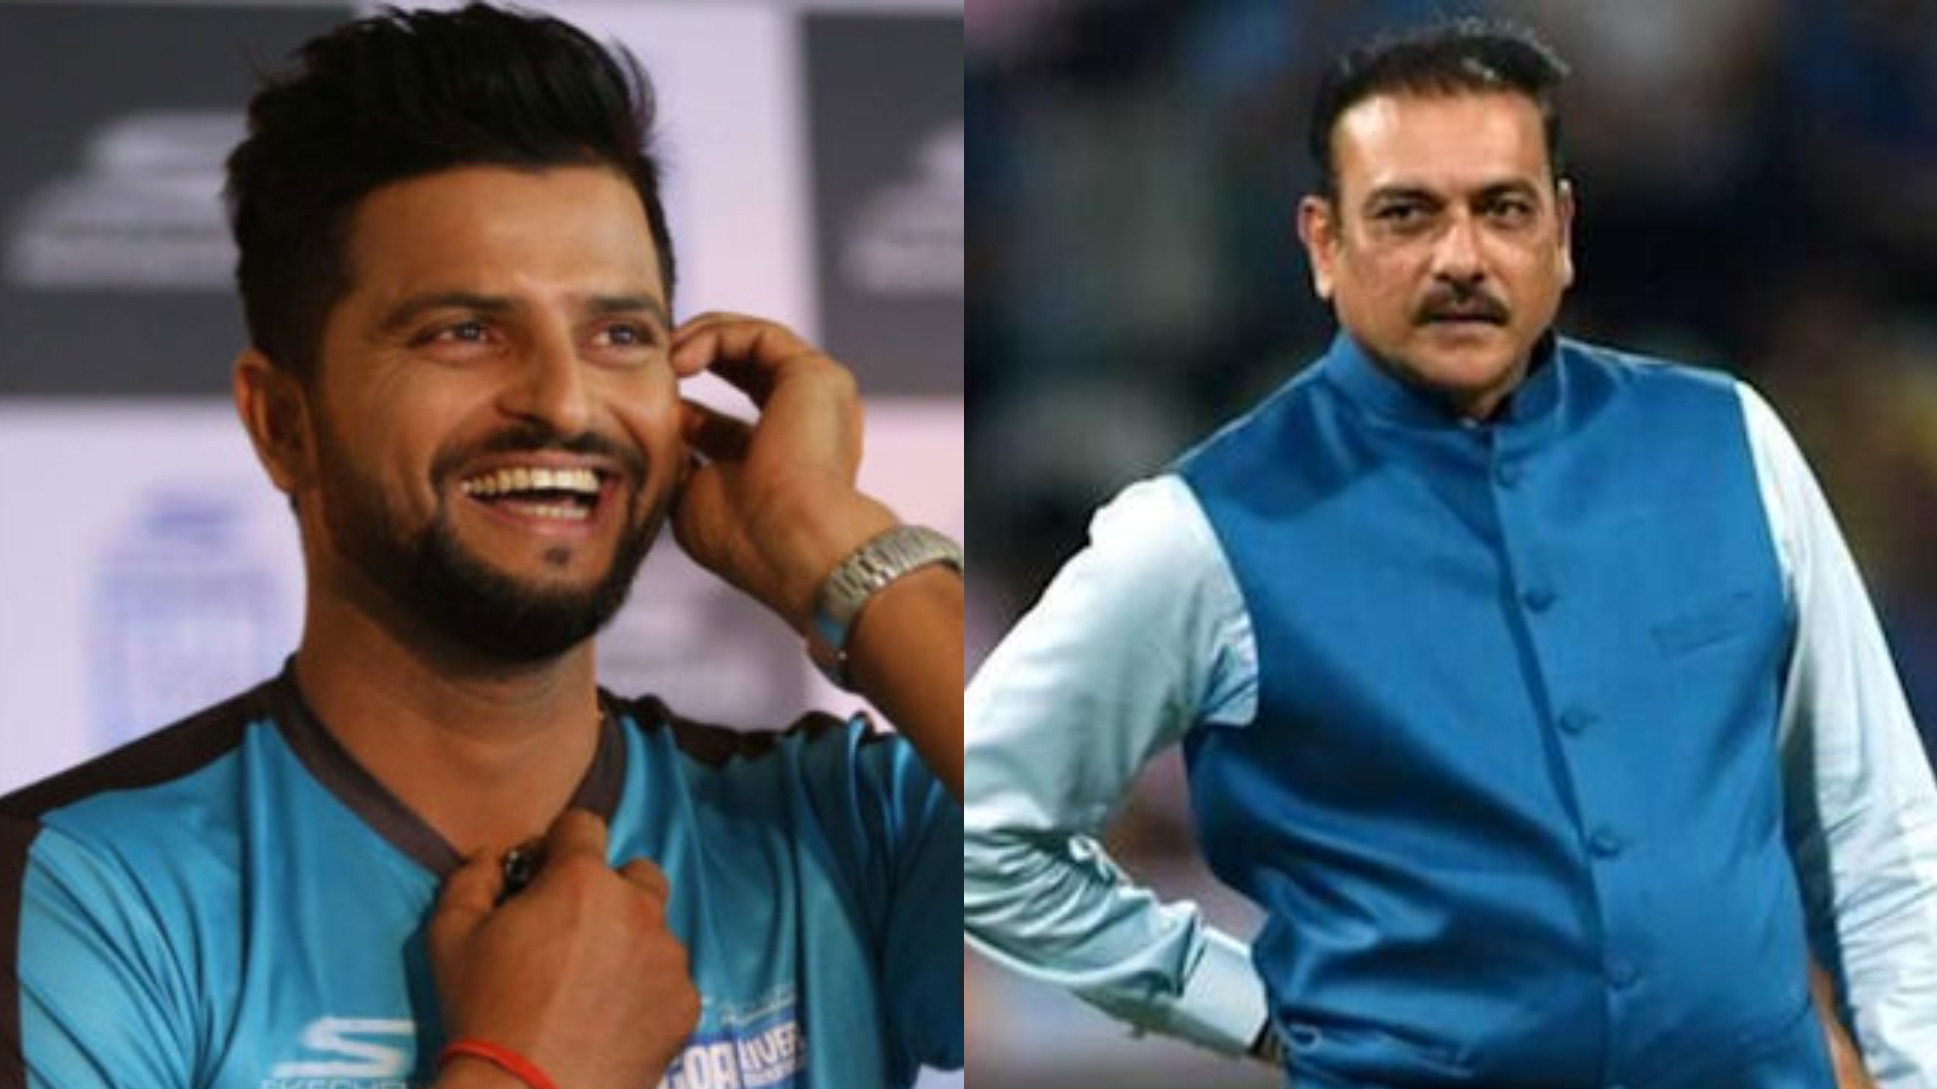 IPL 2022: Star Sports confirms Ravi Shastri and Suresh Raina joining commentary box for IPL 15